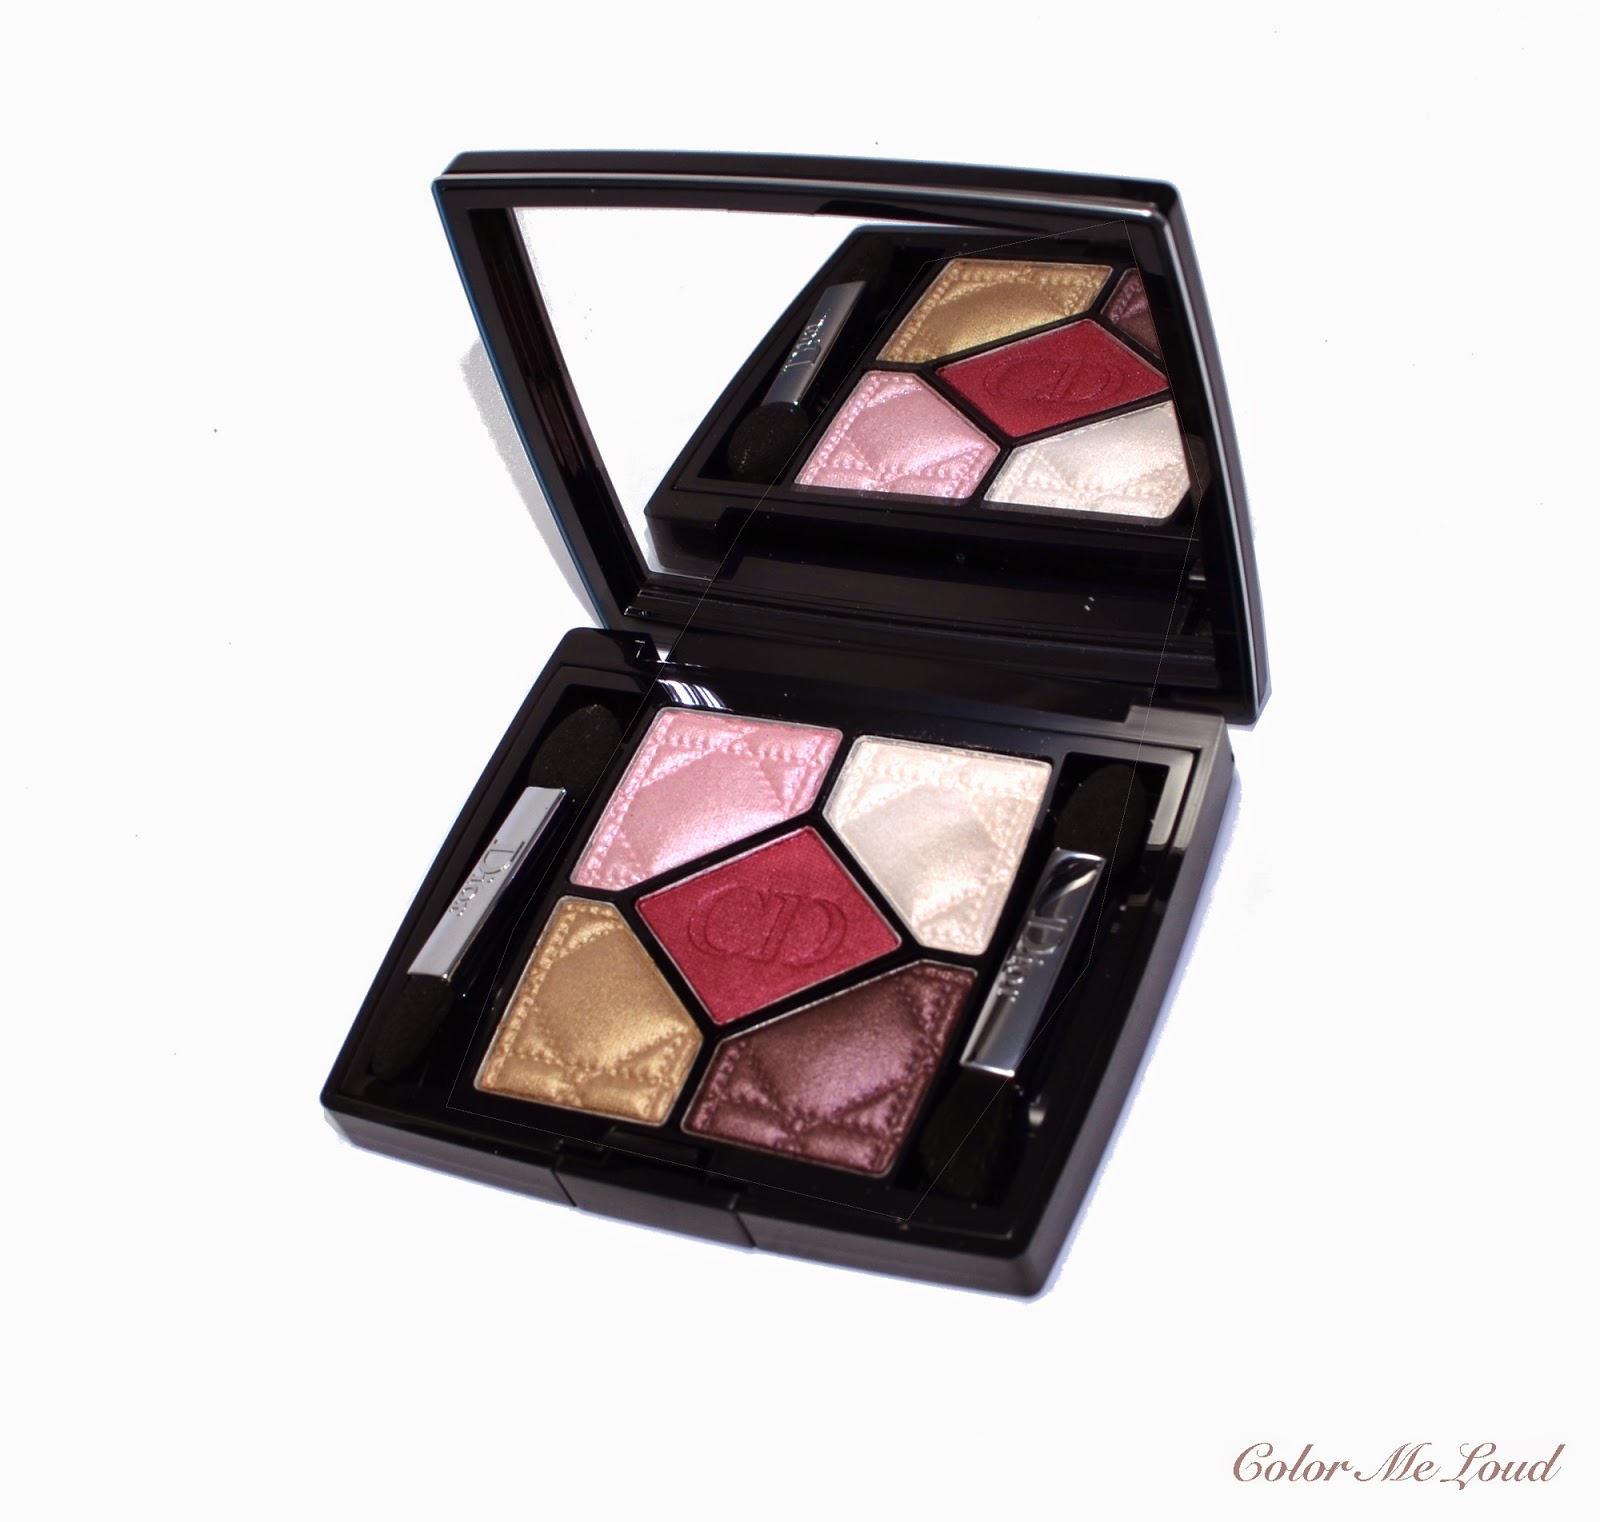 Dior 5 Couleurs Eye Shadow Palette #876 Trafalgar from Fall 2014 Collection, Swatch, Review & FOTD